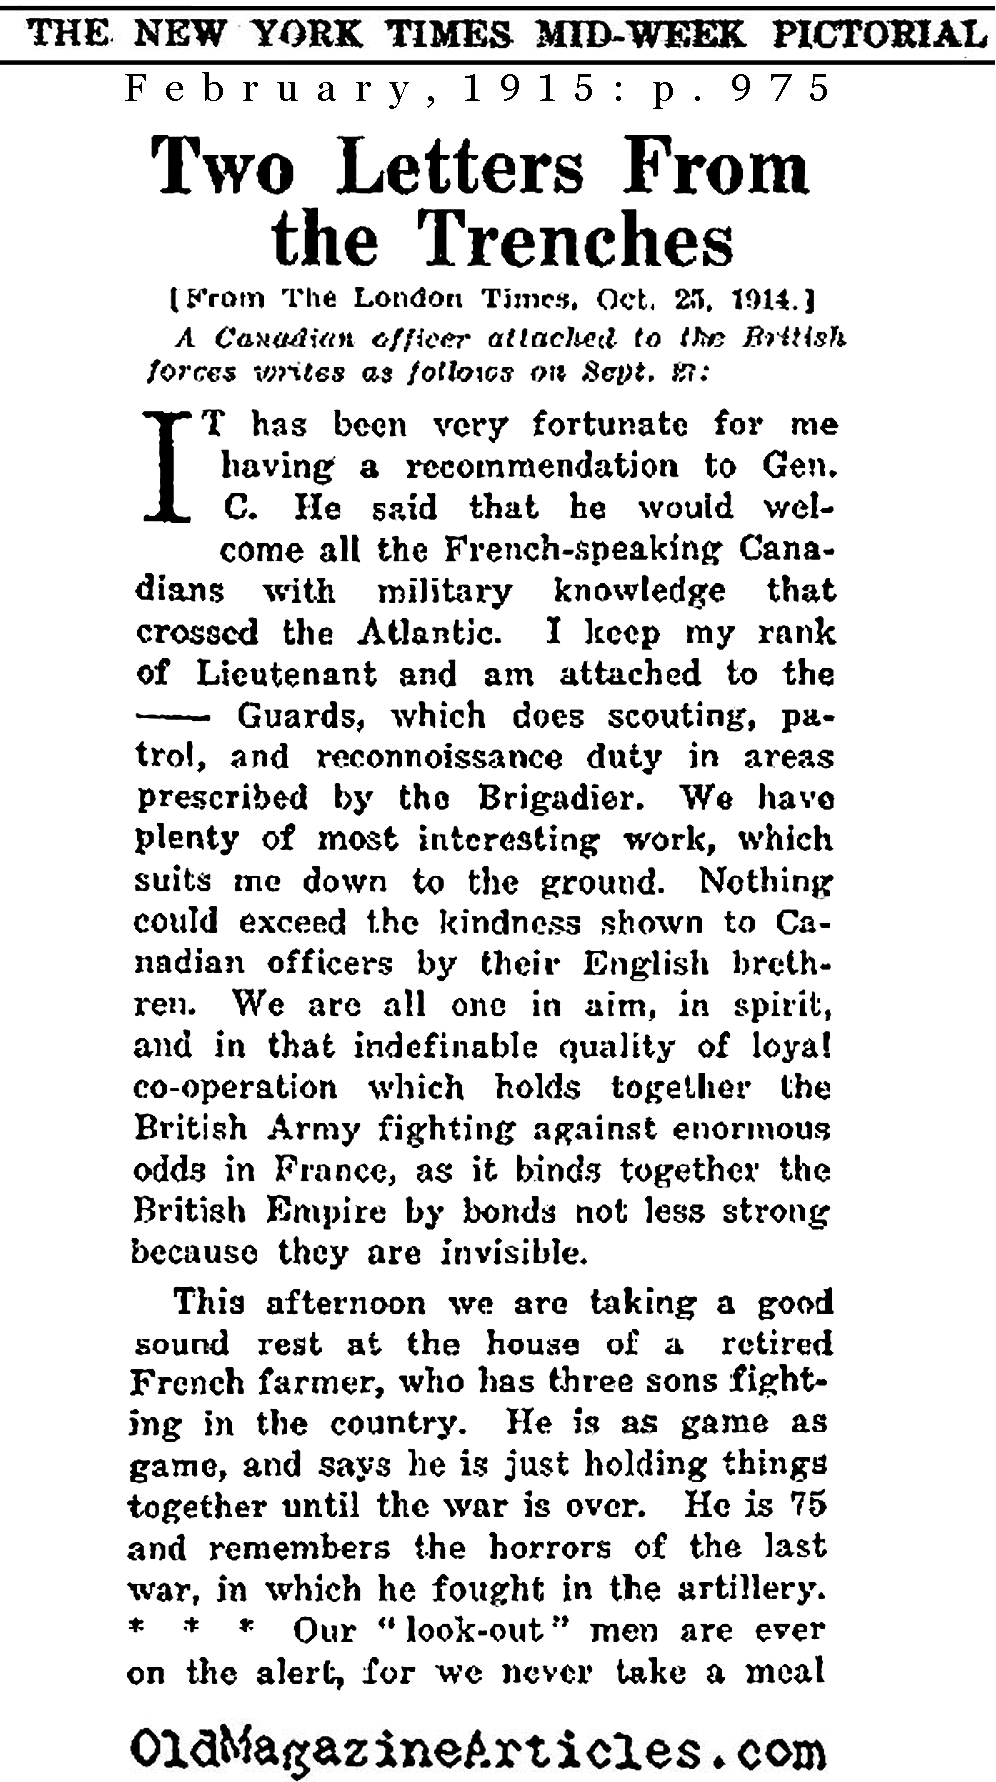 A Letter from the Trenches (New York Times, 1915)